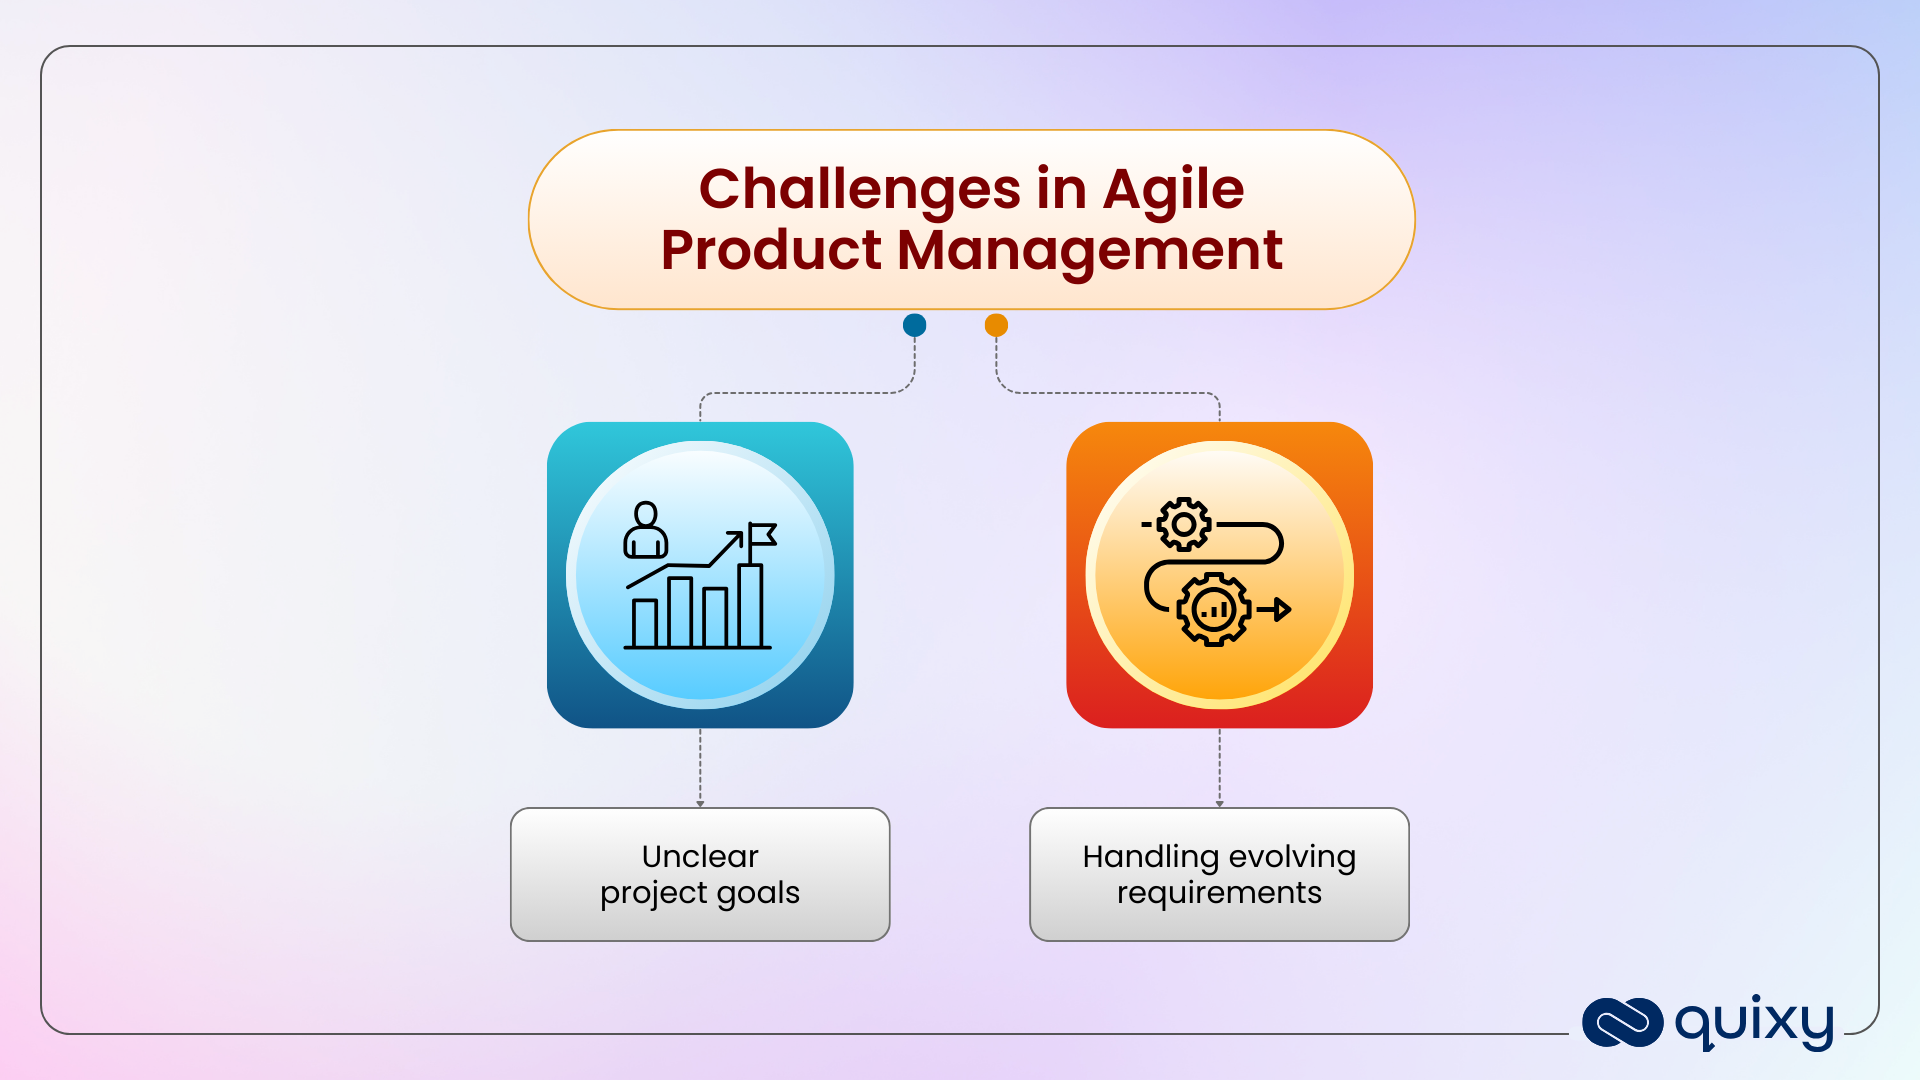 Challenges in Agile Product Management